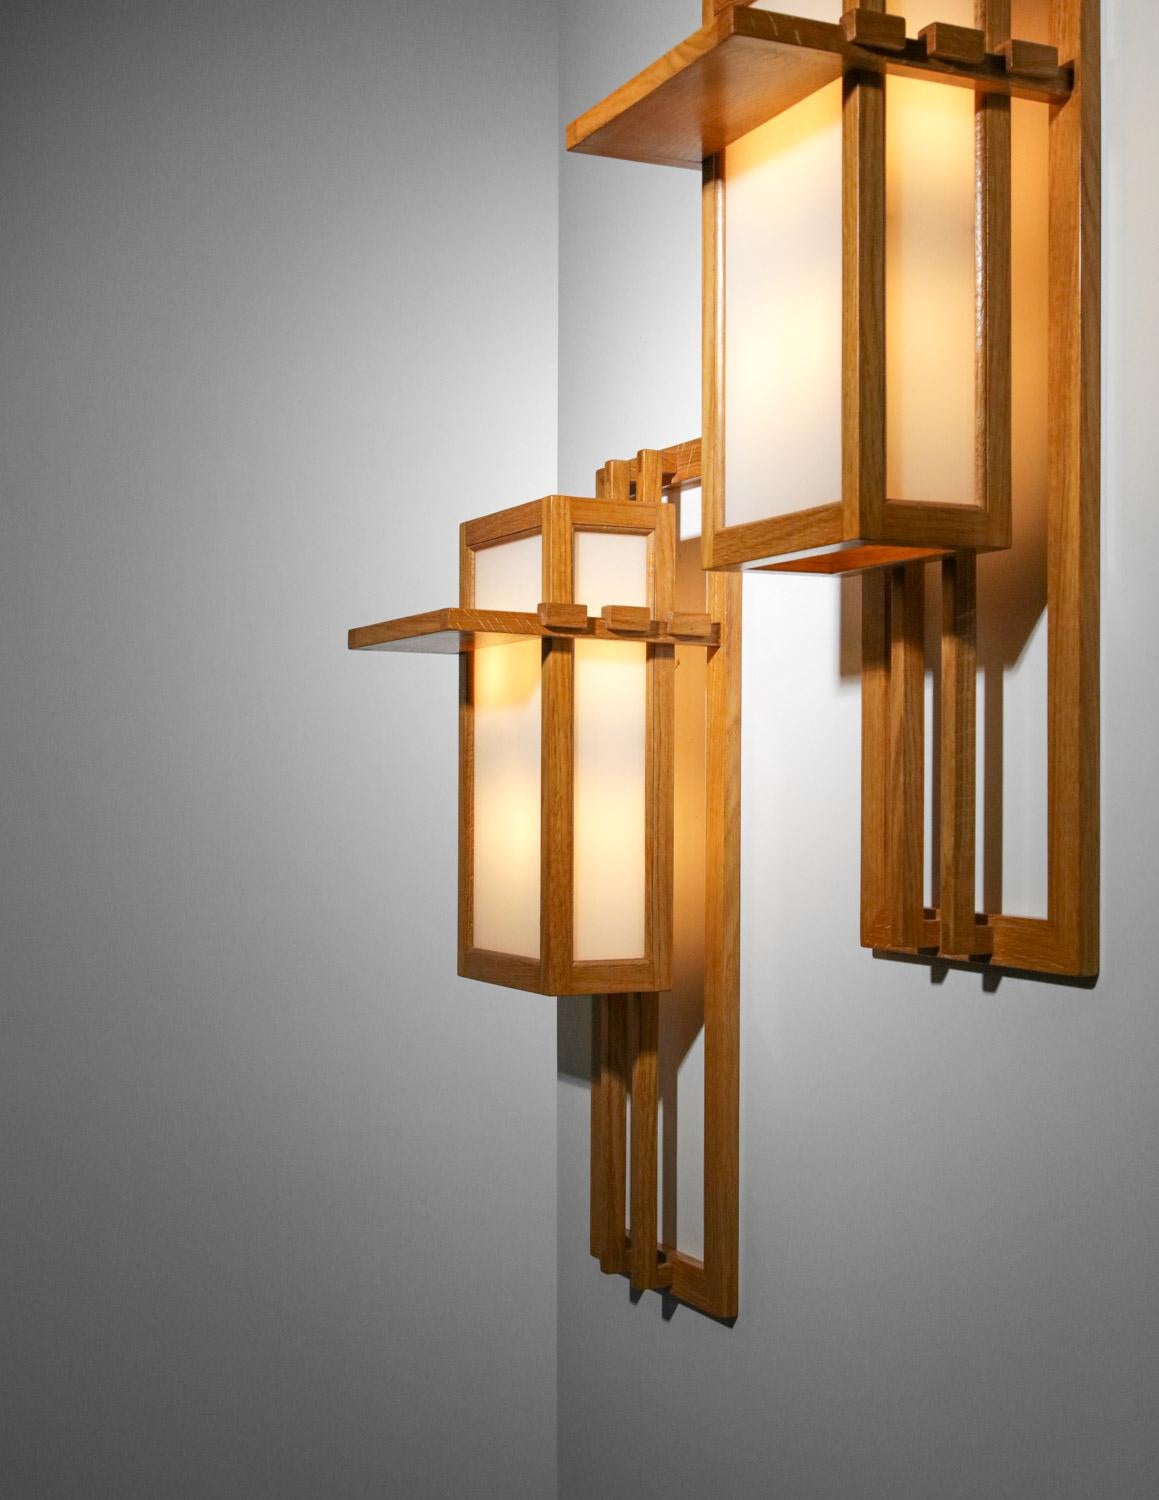 Large pair of modernist sconces from the 50's in the style of Frank Lloyd Wright's work. Structure of the wall sconces in light solid wood and diffusers in white opaque glass. Sober and pure design for very decorative sconces. Very nice vintage